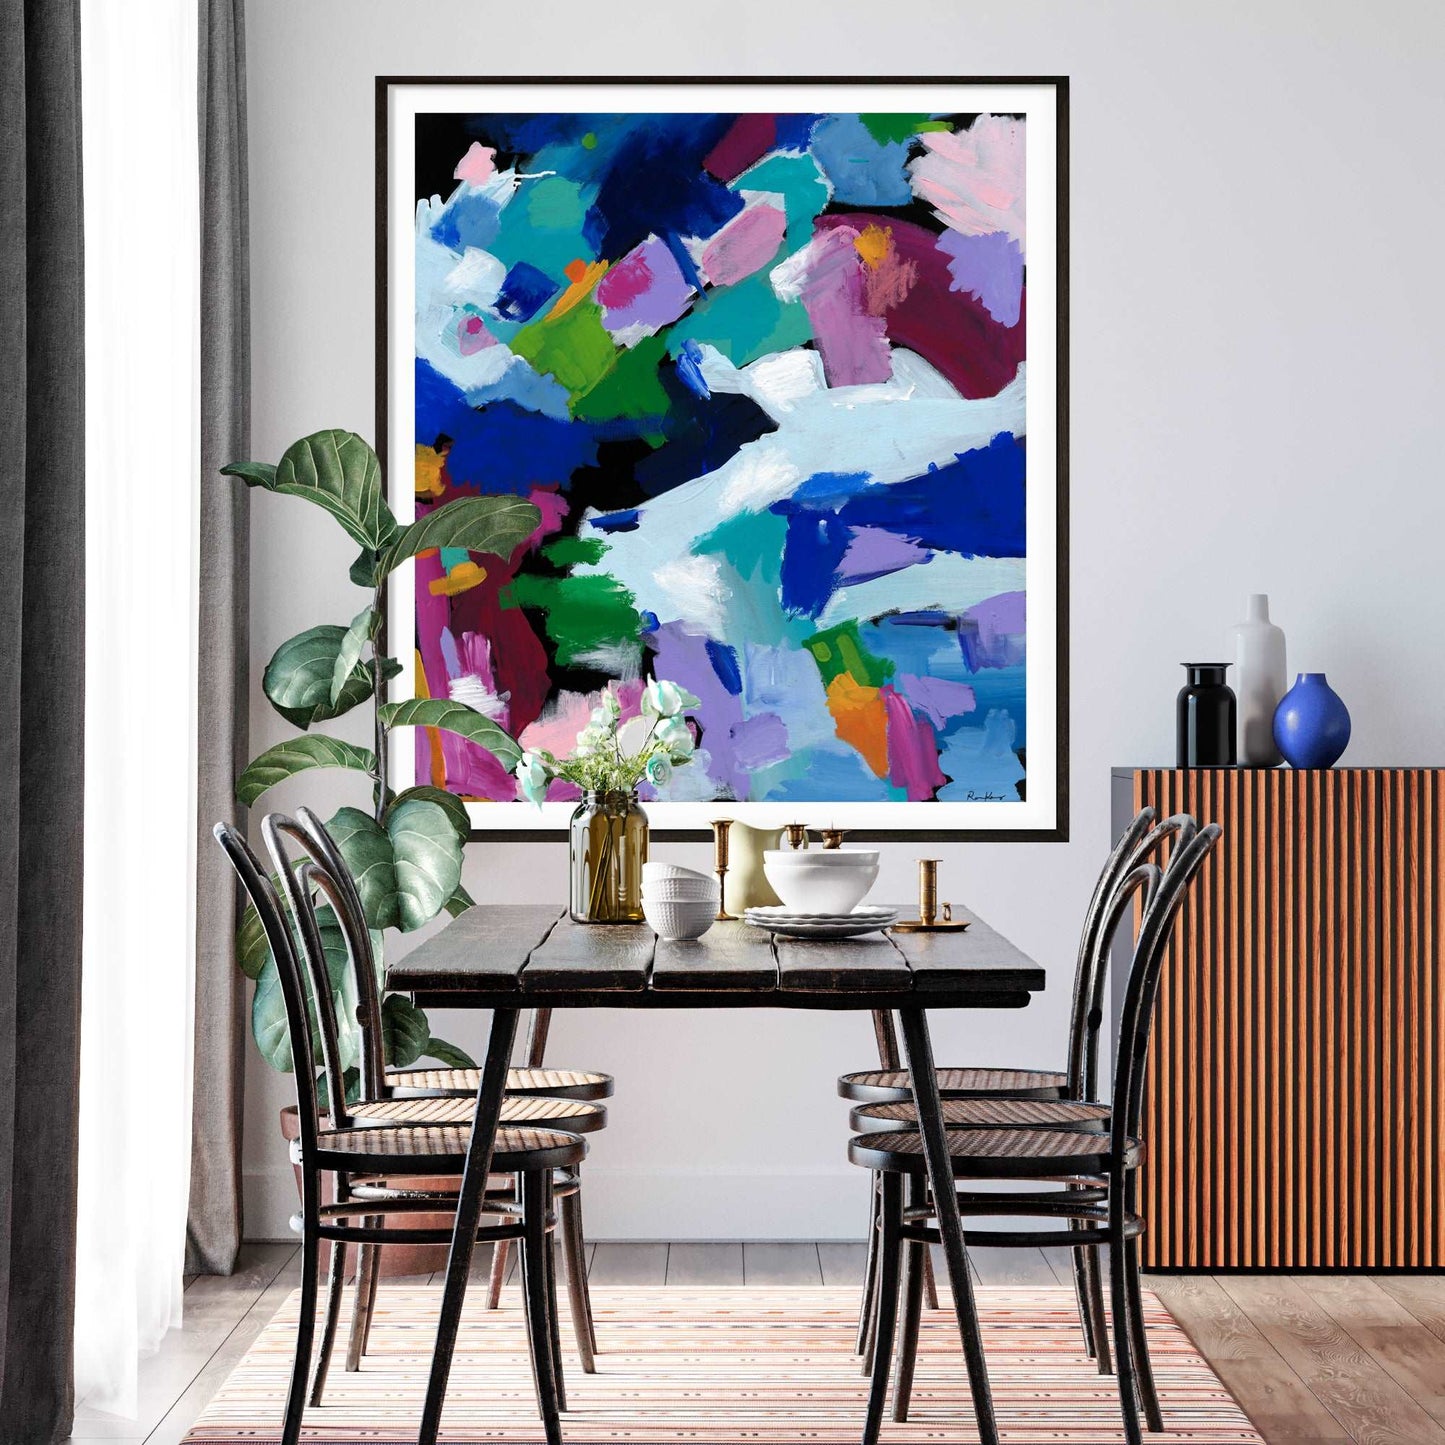 Dreams Collide - Limited Edition Print